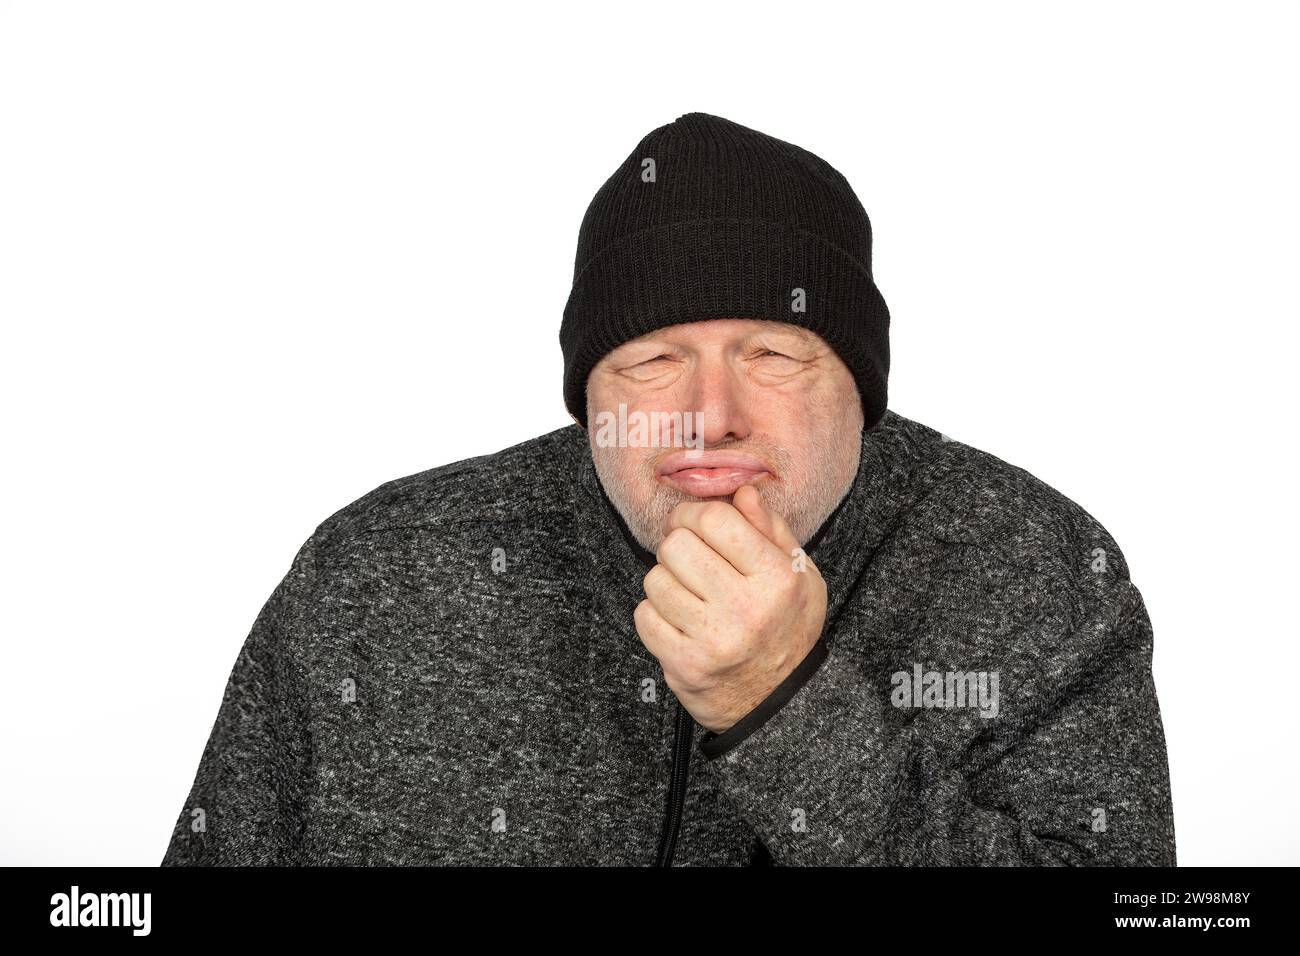 Contemplative Middle-Aged Worker in Black Winter Hat on White Background Feeling the Cold Stock Photo